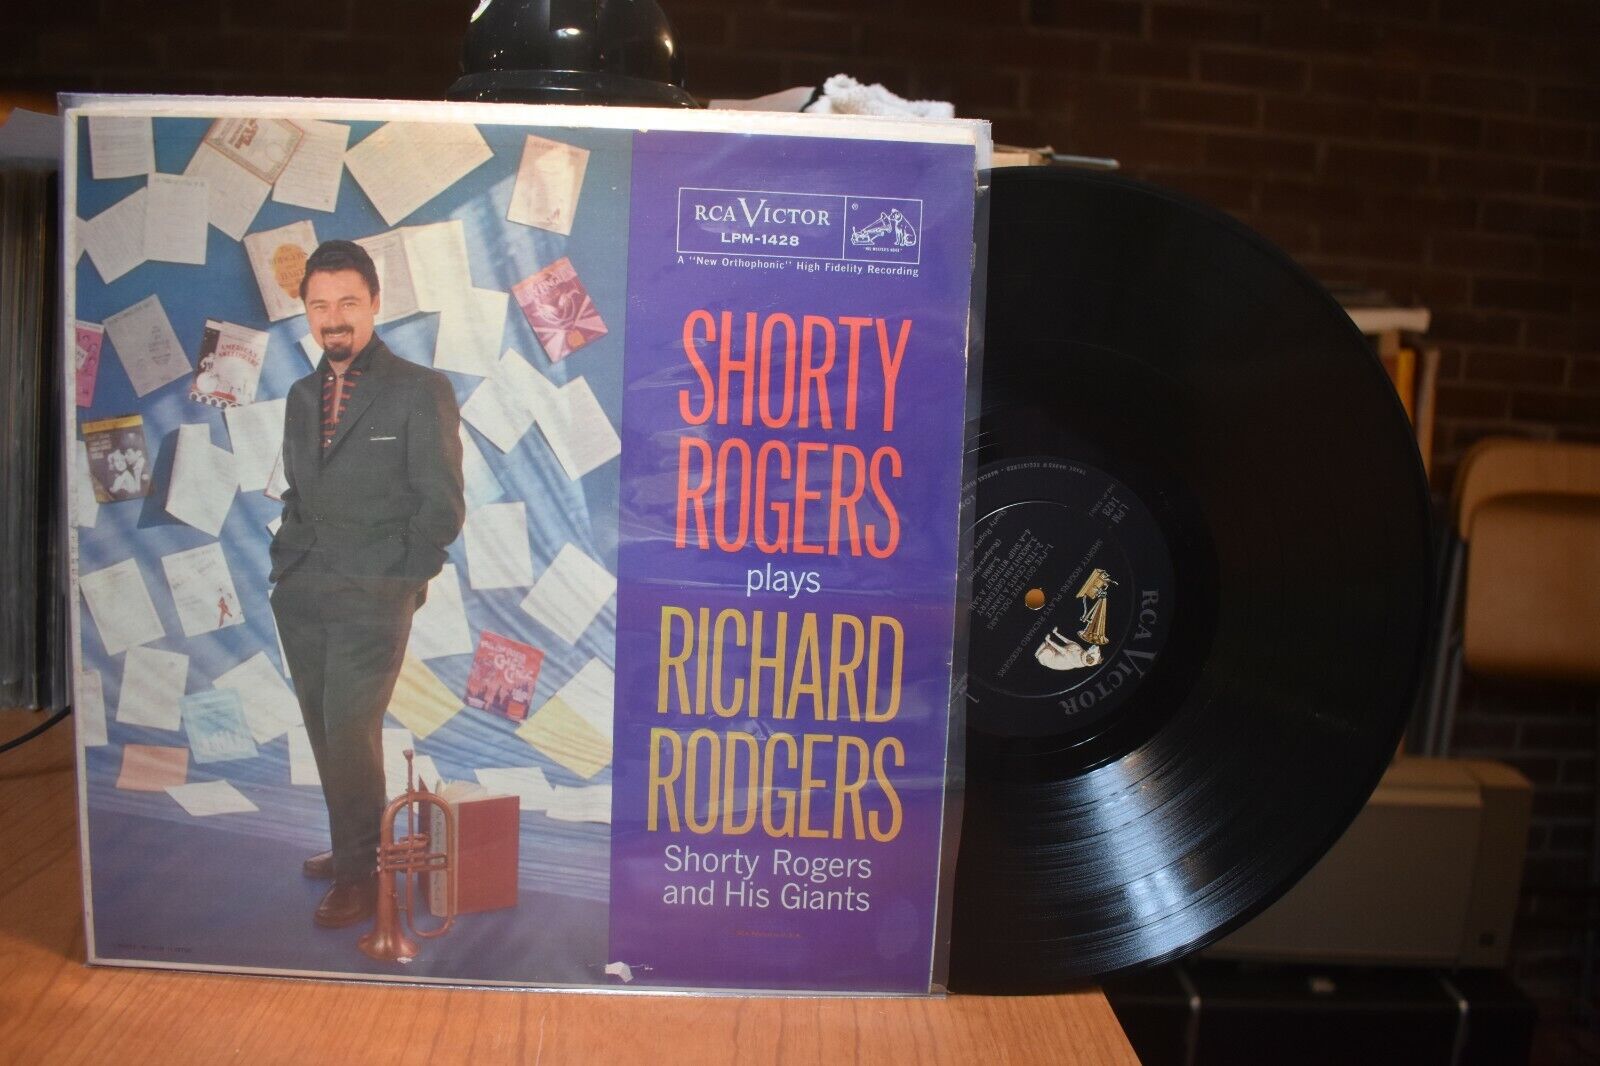 Shorty Rogers and his Giants Shorty Rogers plays Richard Rodgers LP RCA LPM-1428